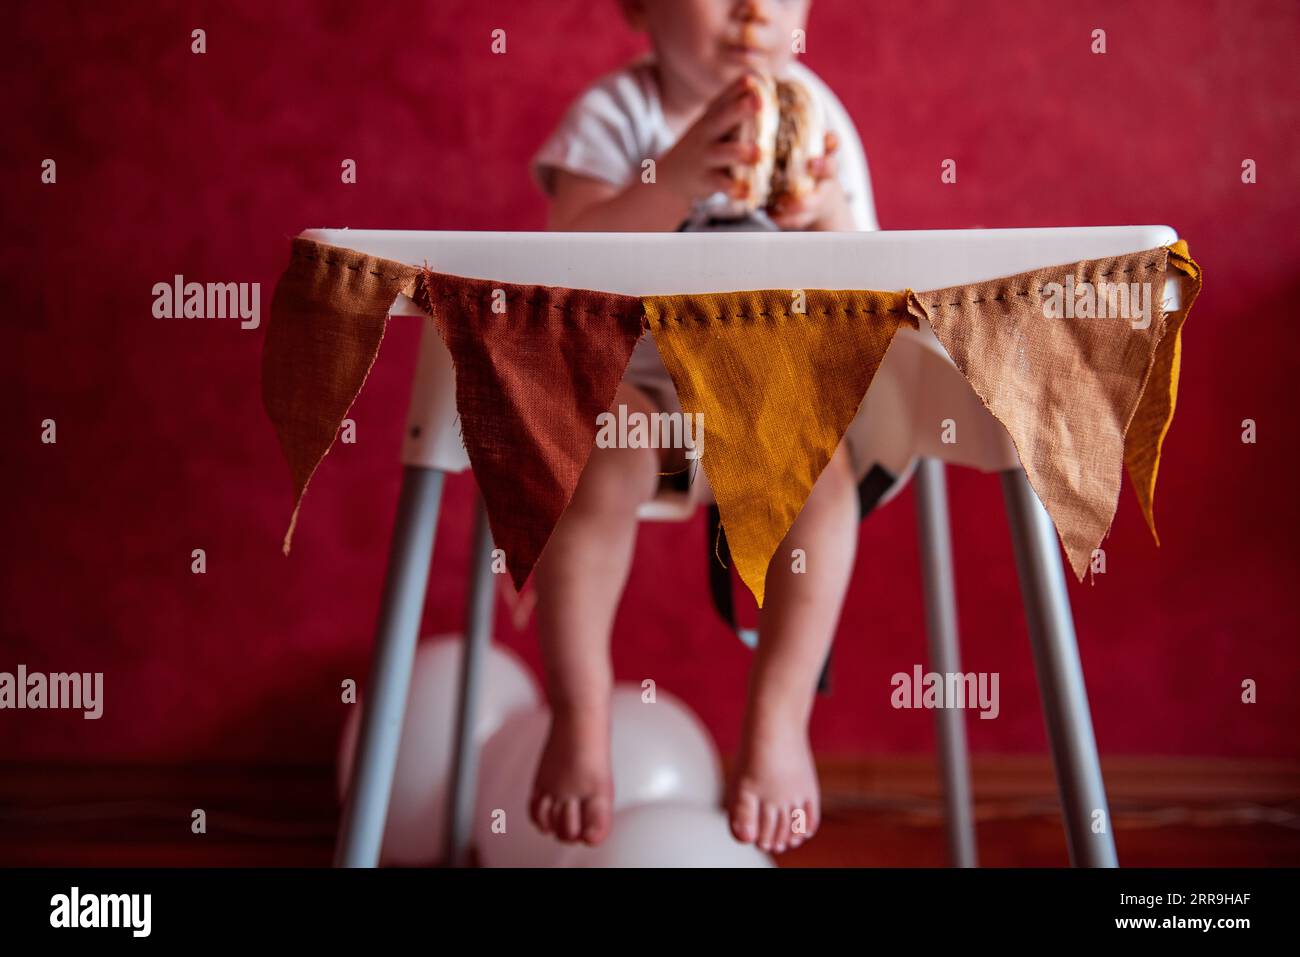 Faceless portrait of baby sitting in feeding chair, festively decorated with fabric pennants for the birthday party. On red textural background with b Stock Photo